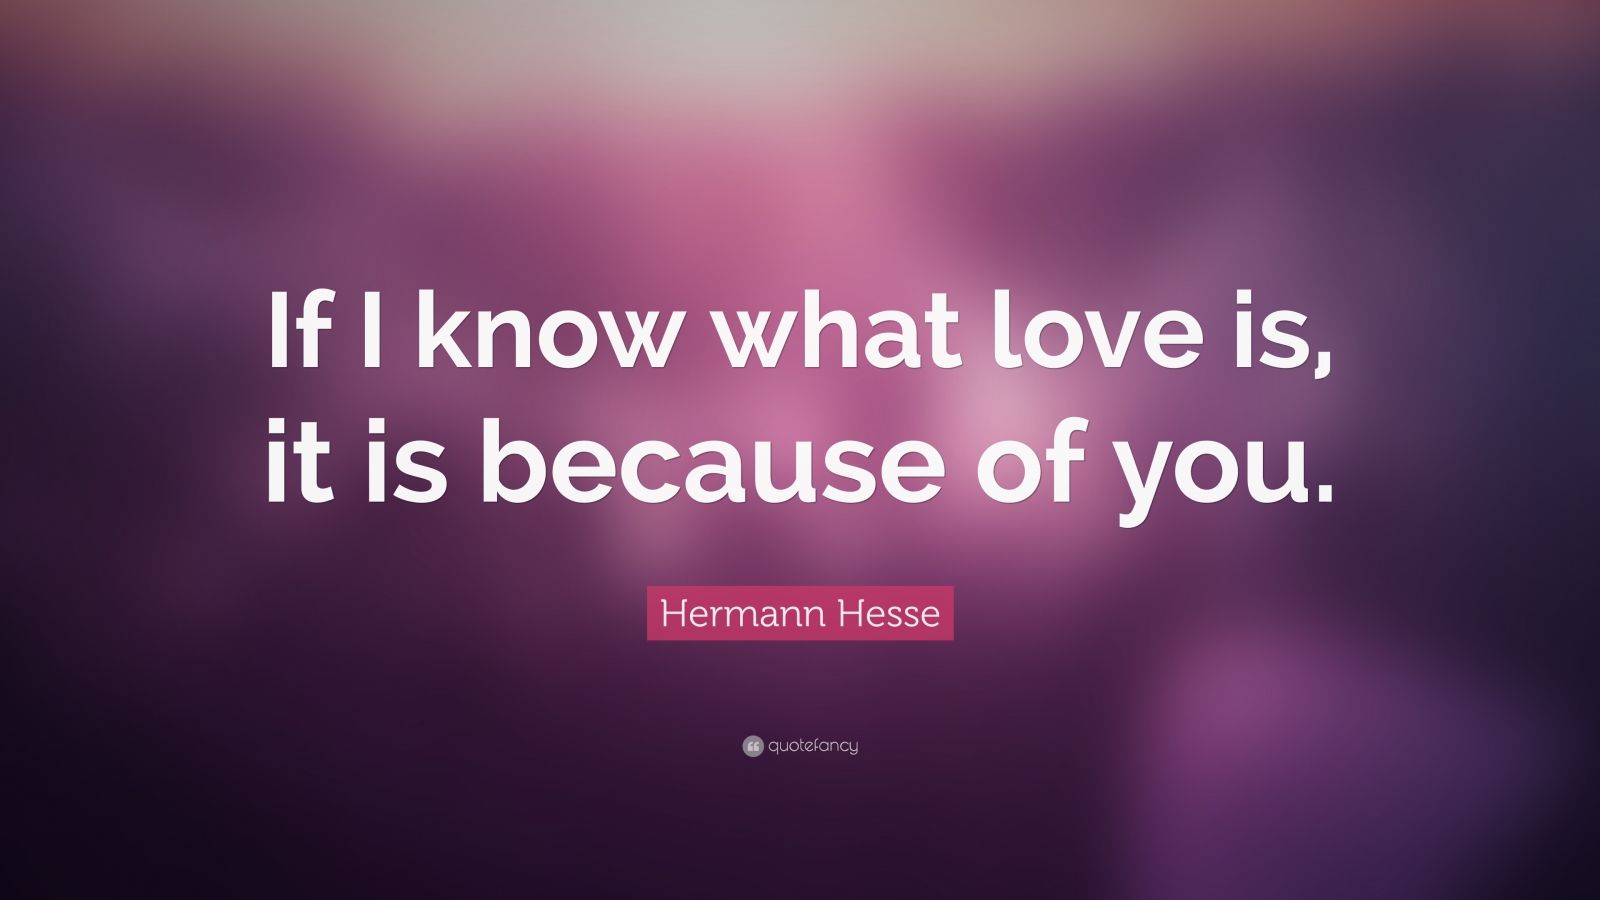 Hermann Hesse Quote: “If I know what love is, it is because of you ...